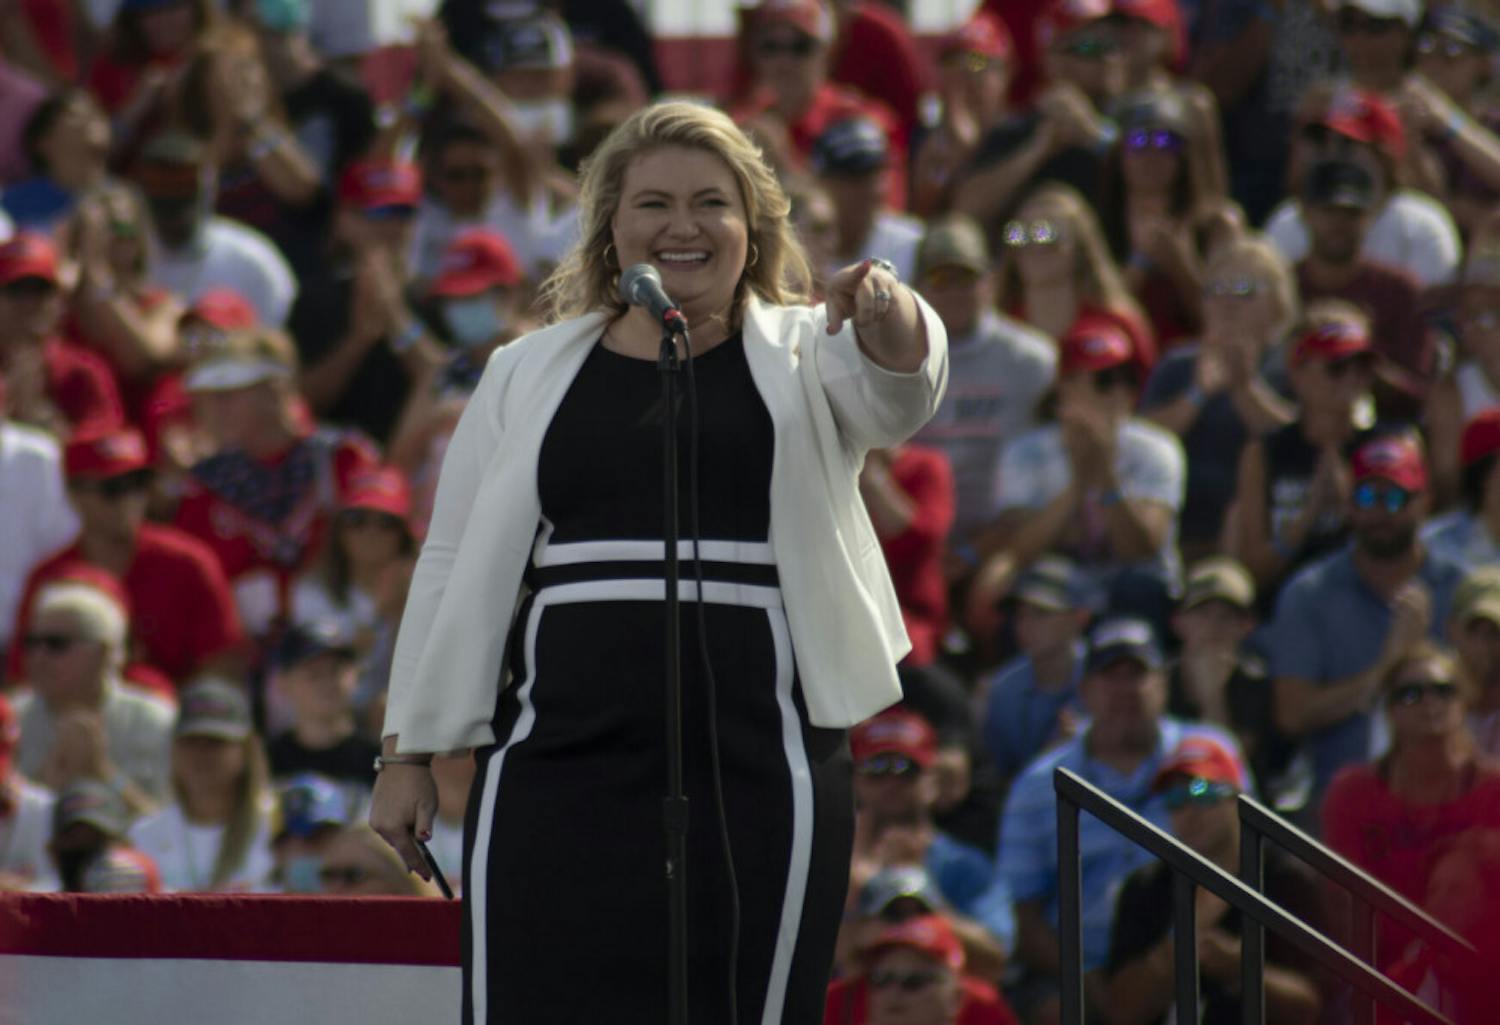 Kat Cammack, winner of the Congressional District 3 race&nbsp;in the 2020 election, is seen giving an opening speech at President Donald Trump's campaign rally last month. The event was held at the Ocala International Airport in Florida on Oct. 16, 2020.&nbsp;